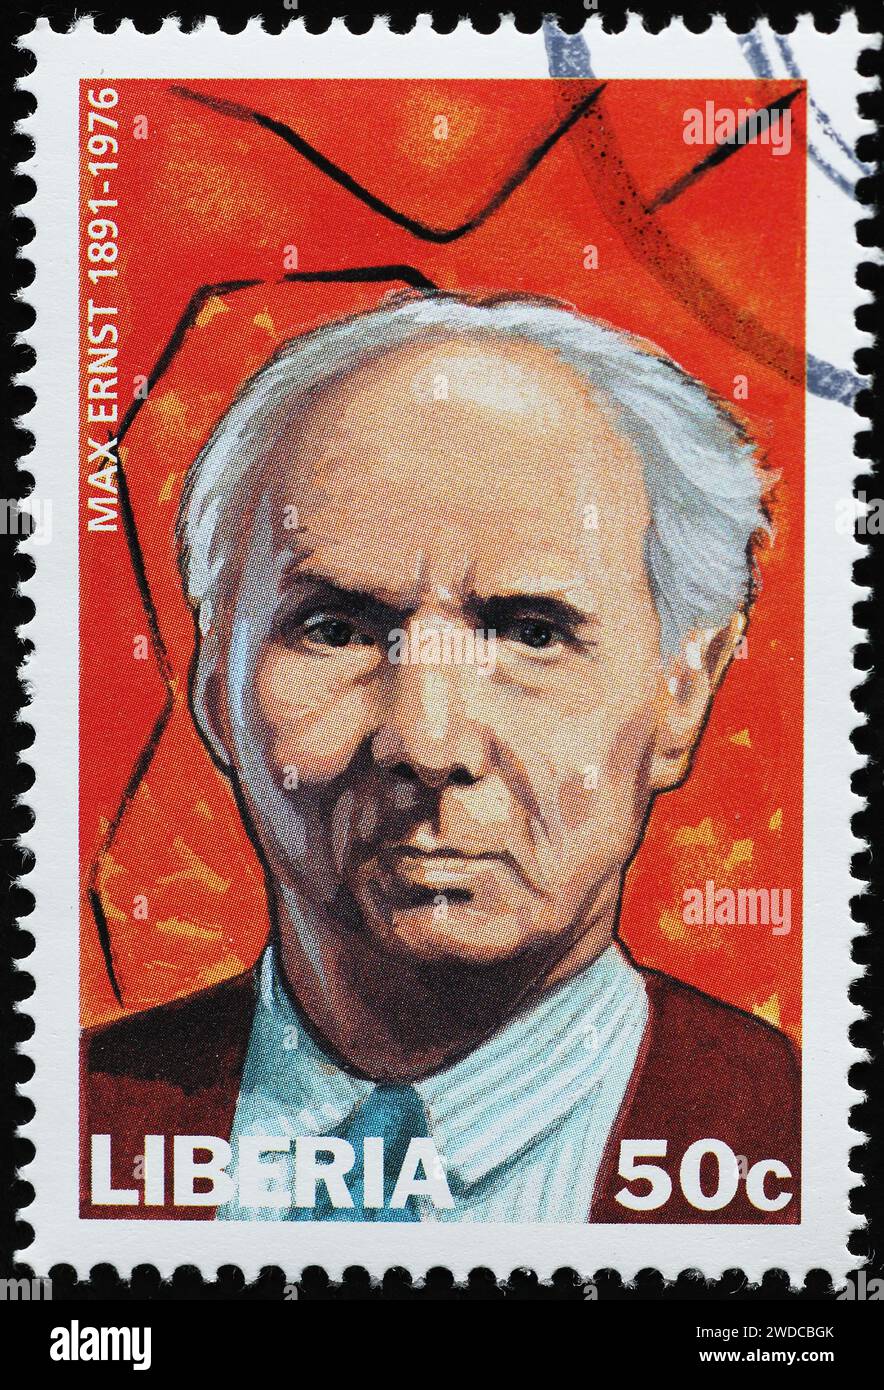 Portrait of Max Ernst on postage stamp of Liberia Stock Photo